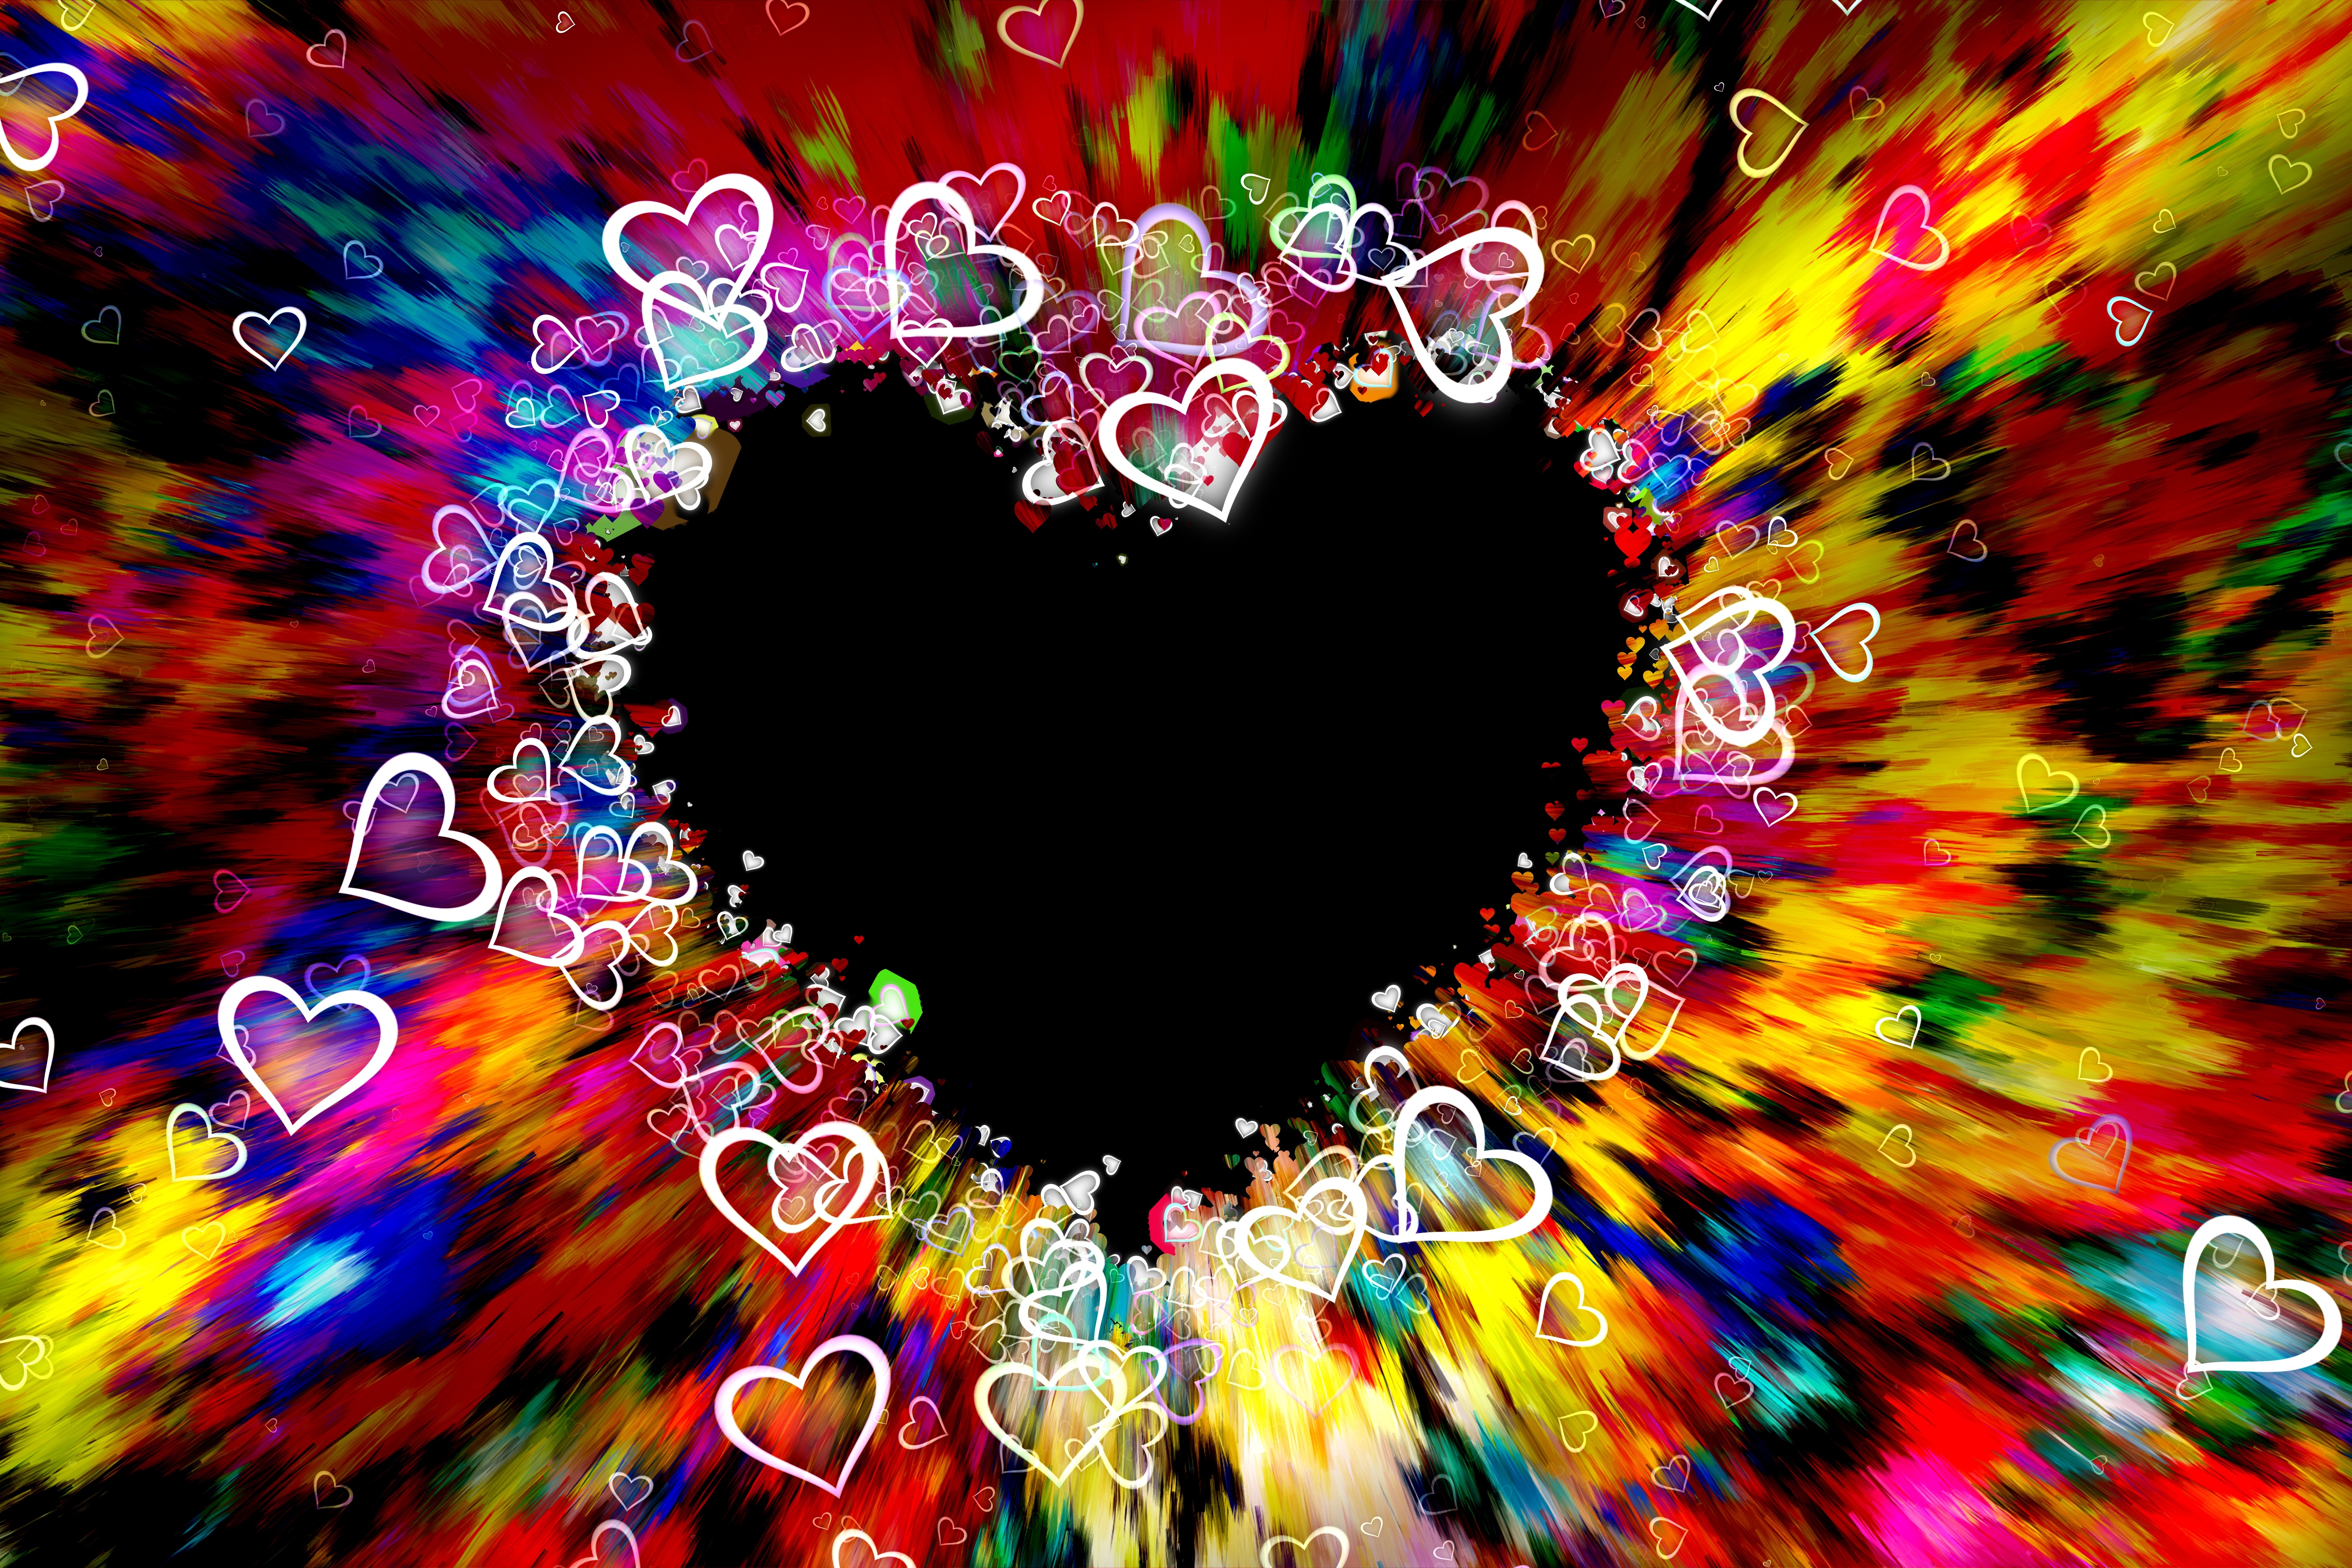 HD wallpaper, Aesthetic, 5K, Love Hearts, Colorful Abstract